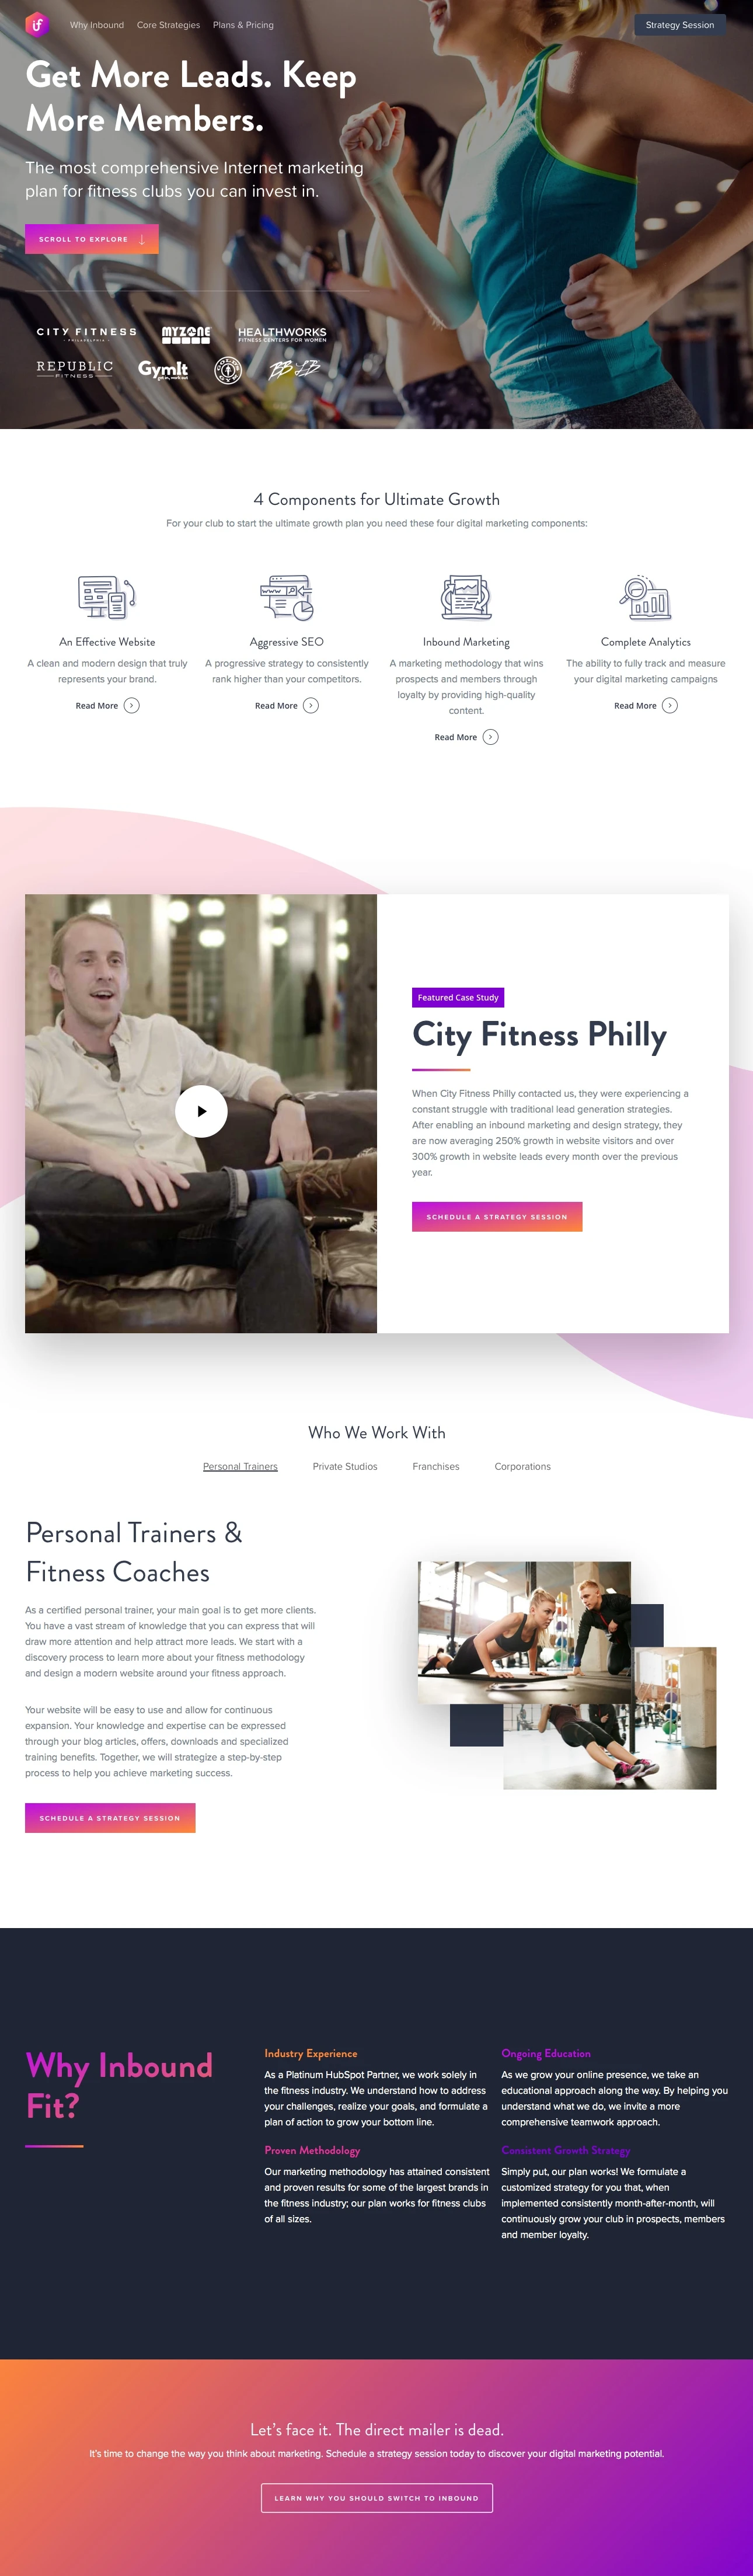 Inbound Fit Landing Page Example: Your brand and authority in fitness in your local area is paramount to overall growth. Ignite your club's growth with Internet Marketing for fitness clubs.